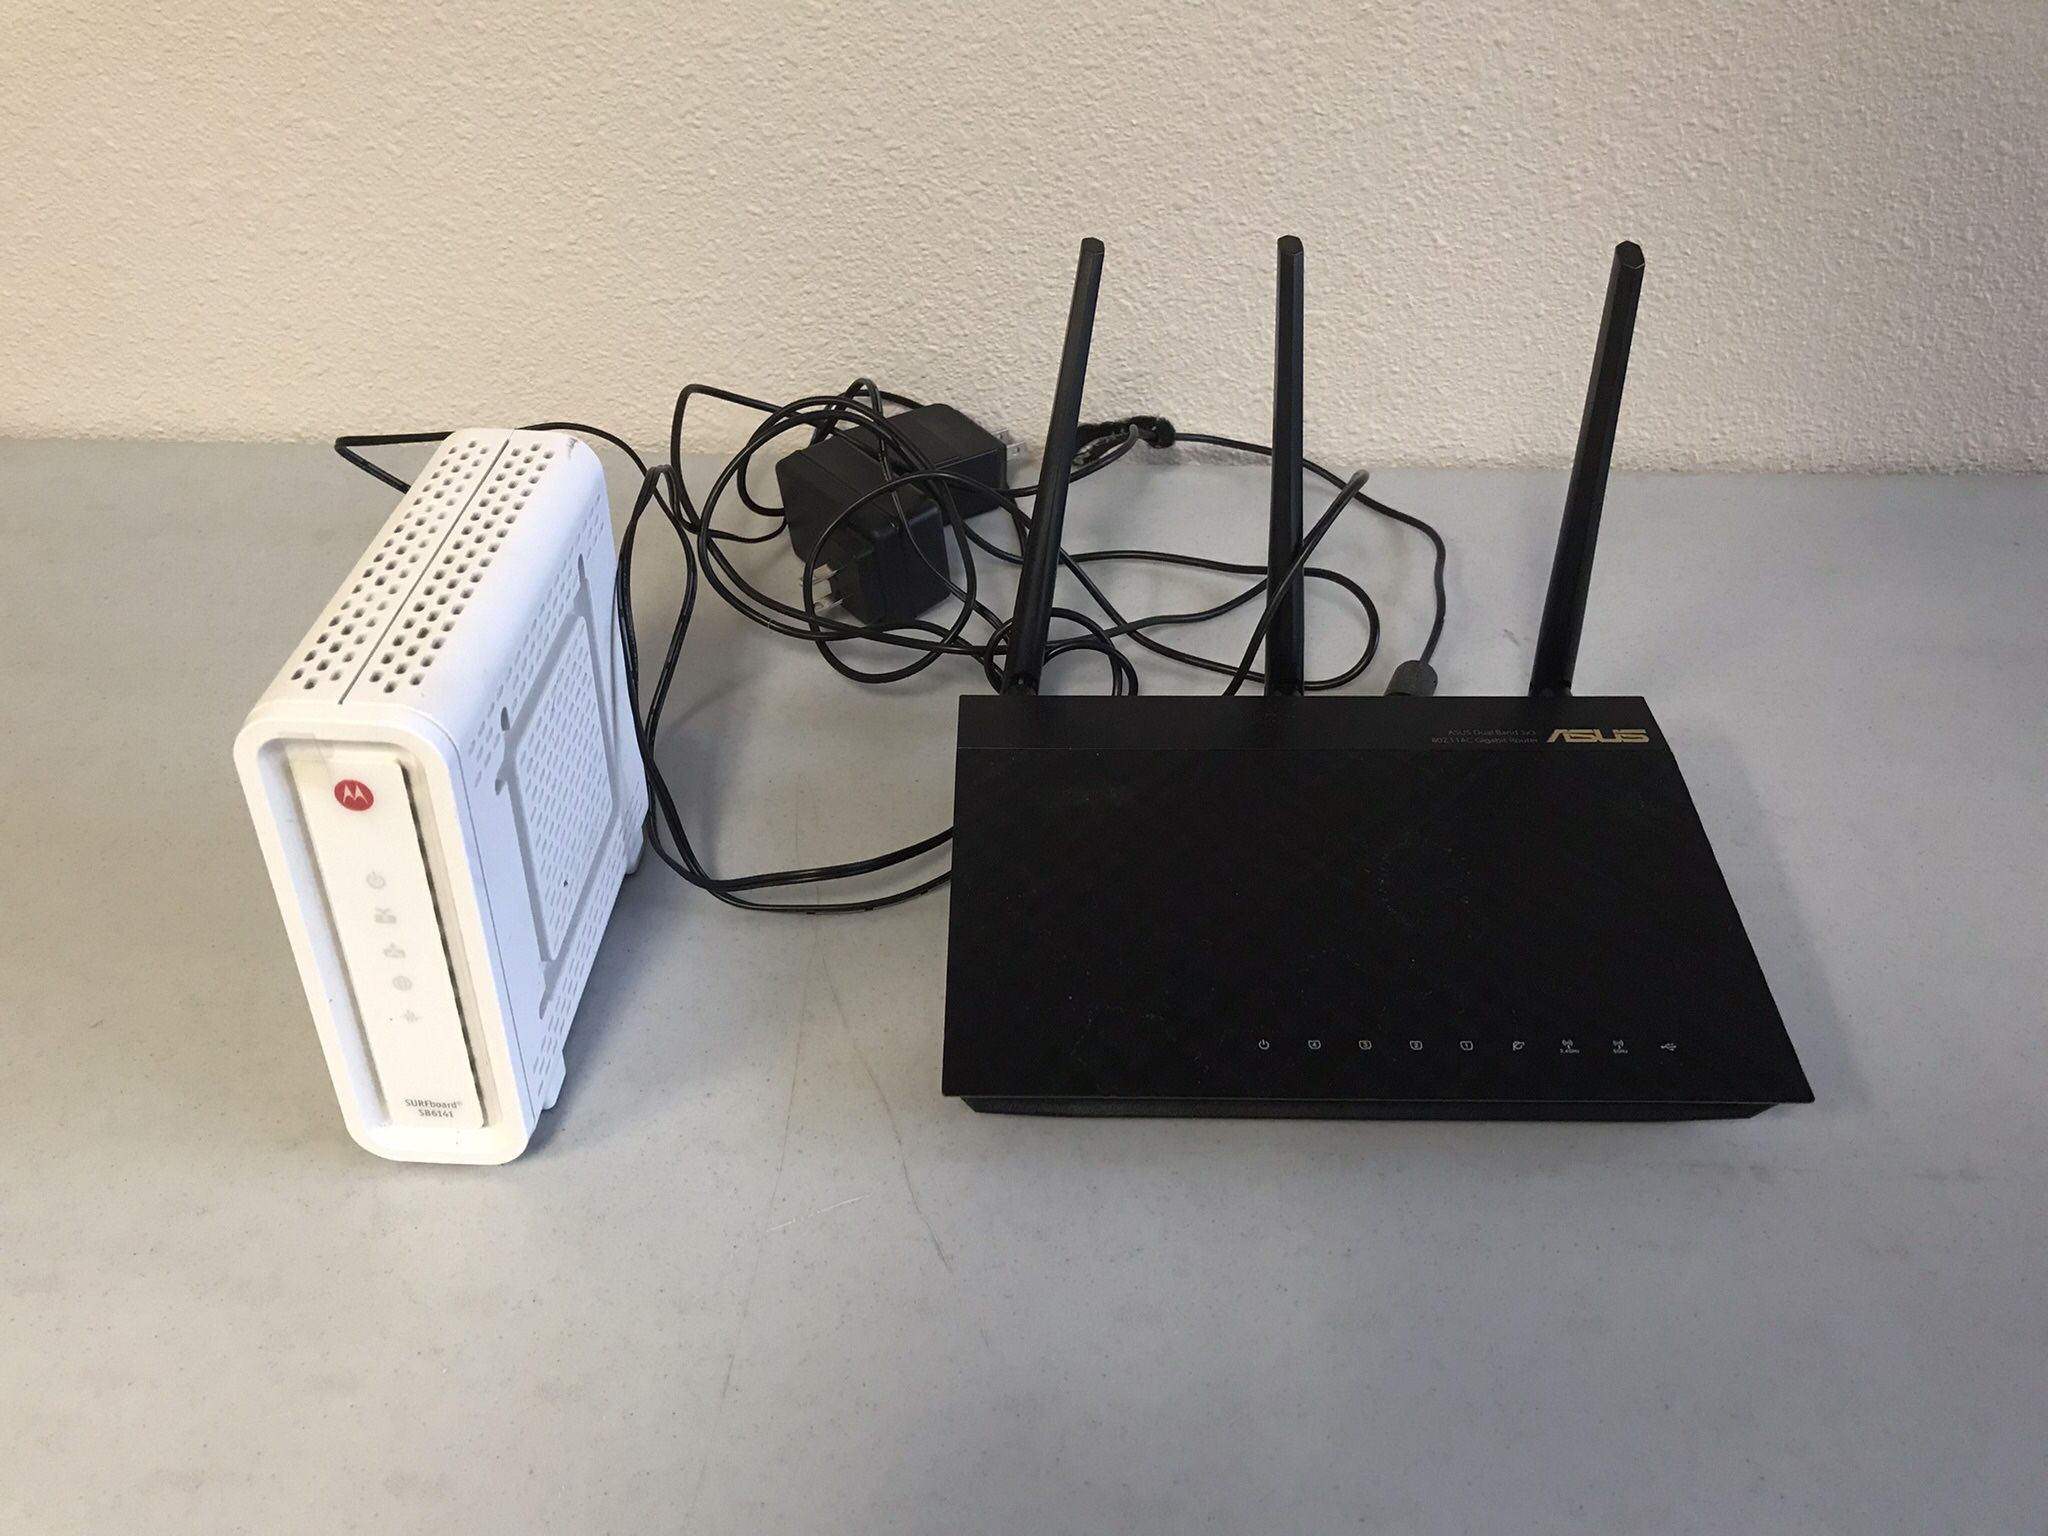 ASUS Router & Motorola Modem used with Comcast Business Internet